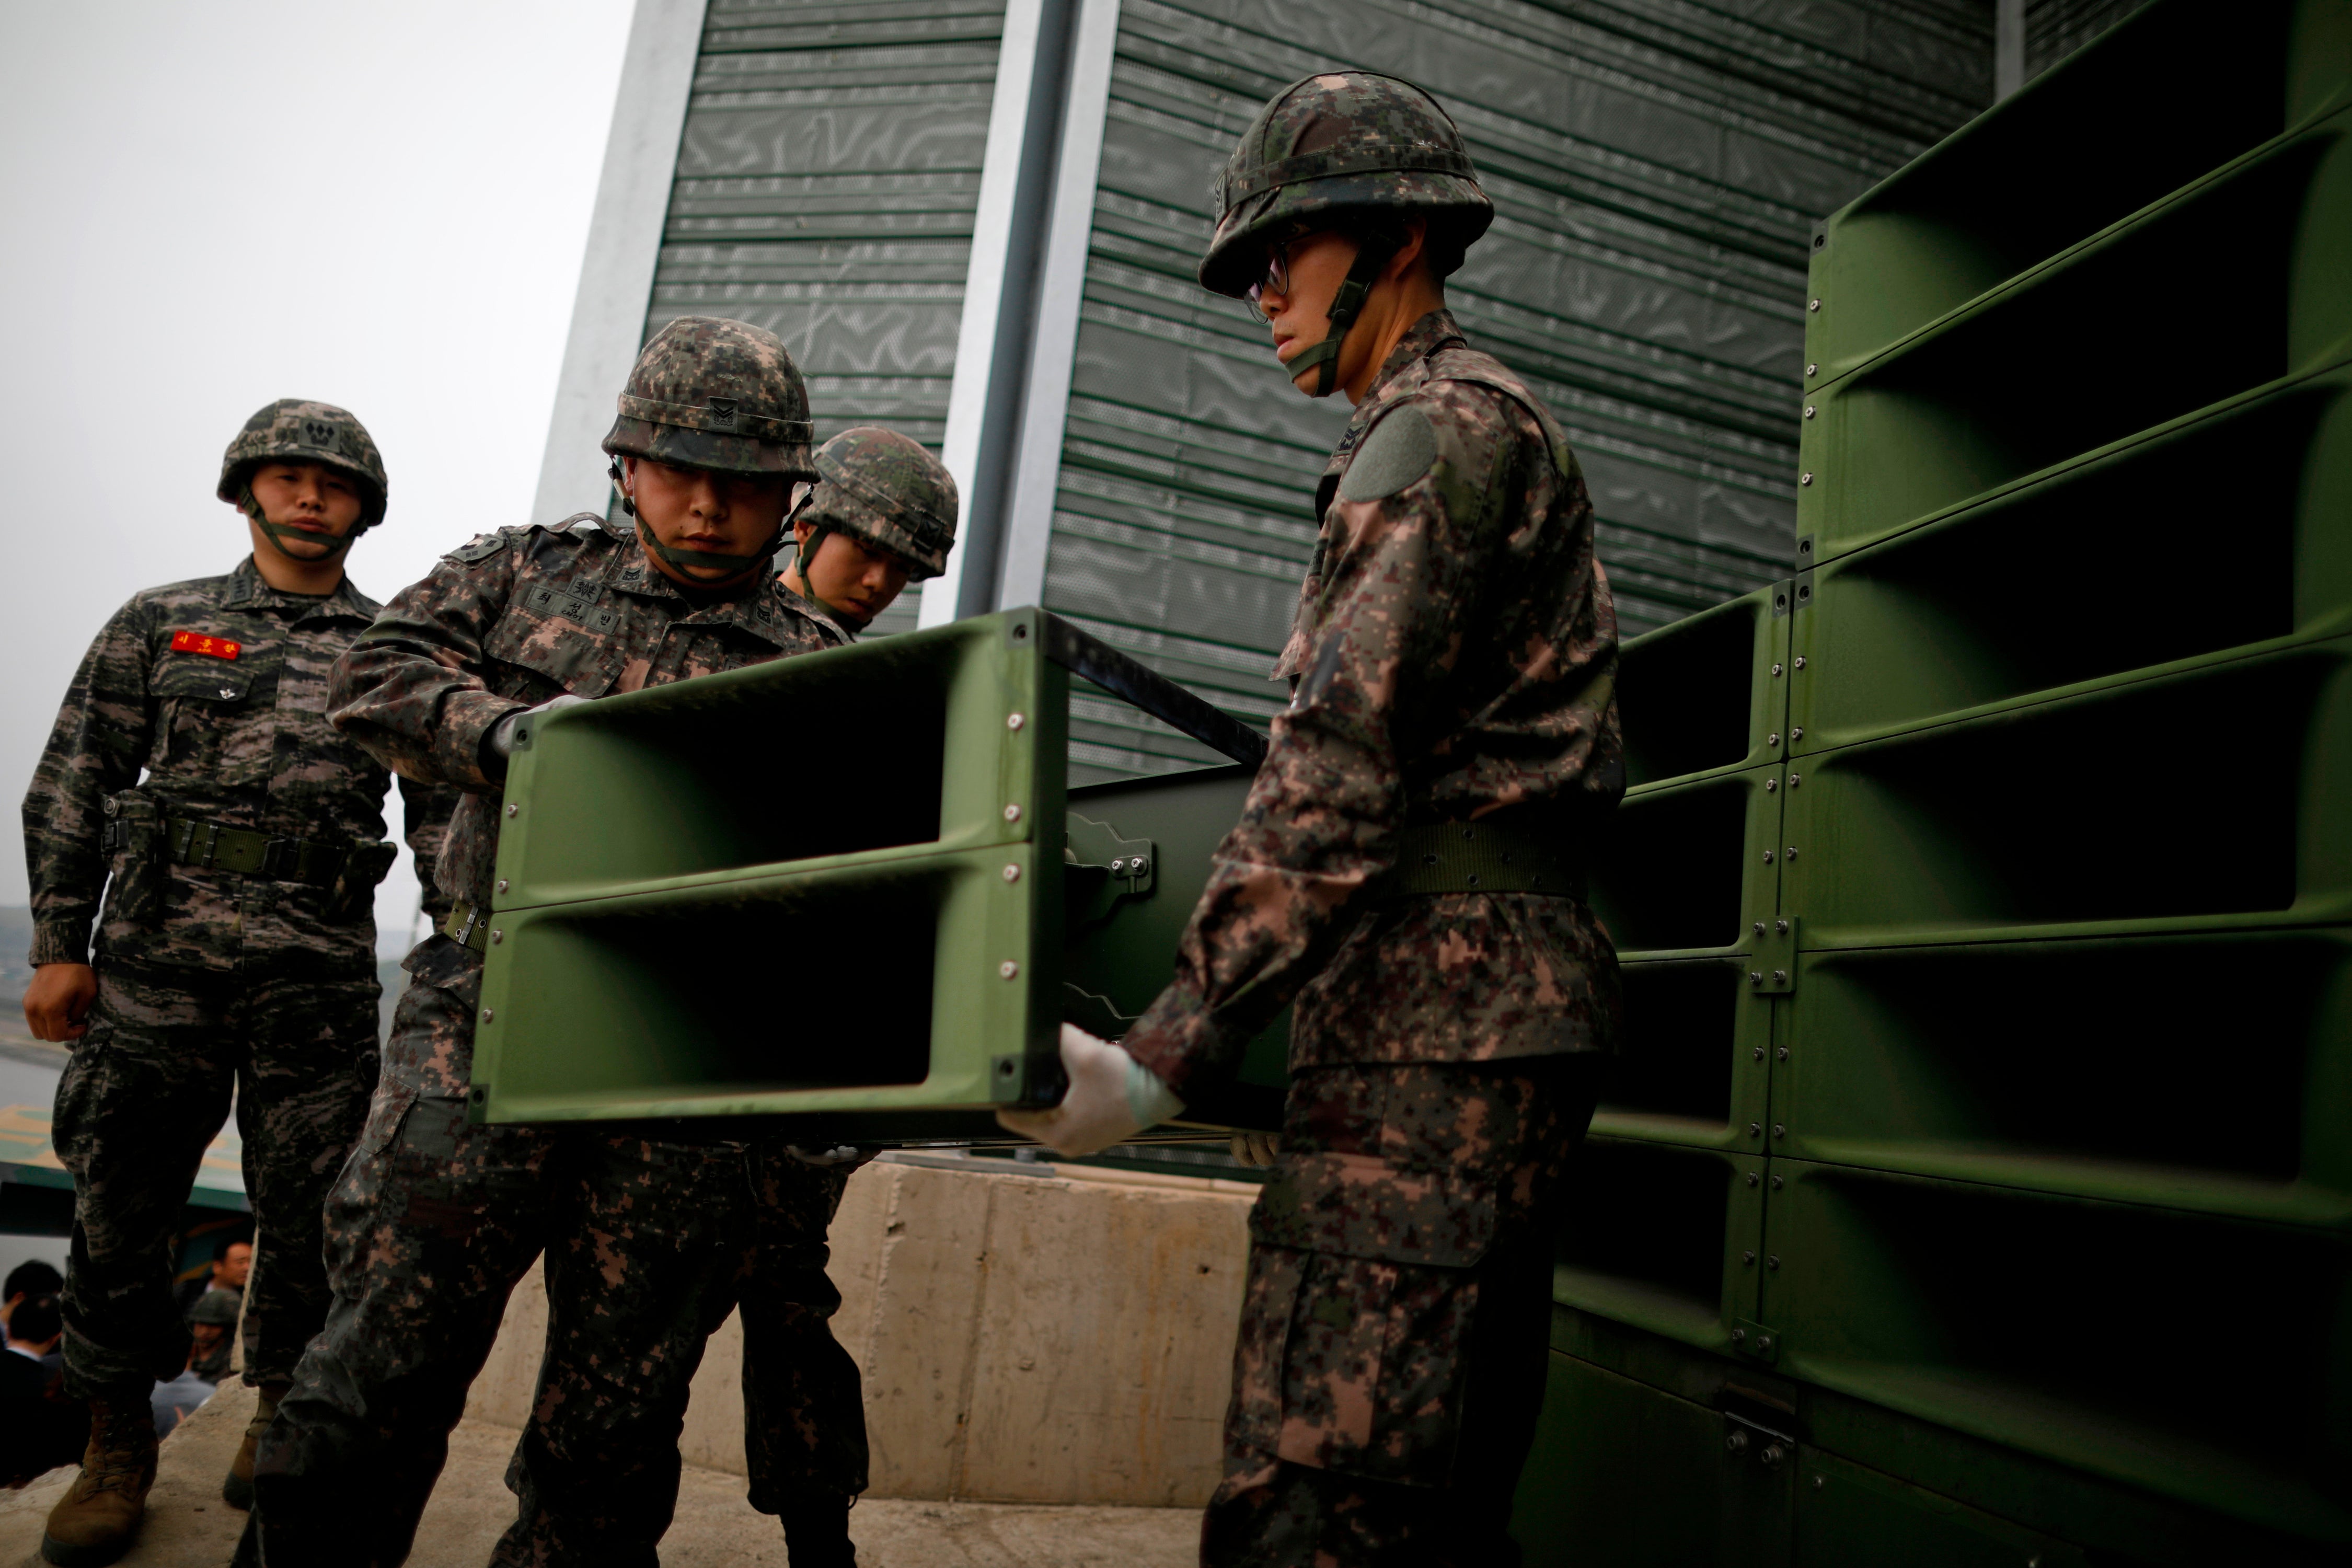 South Korean soldiers dismantle loudspeakers set up for propaganda broadcasts near the demilitarized zone separating the two Koreas in Paju, South Korea, on 1 May 2018